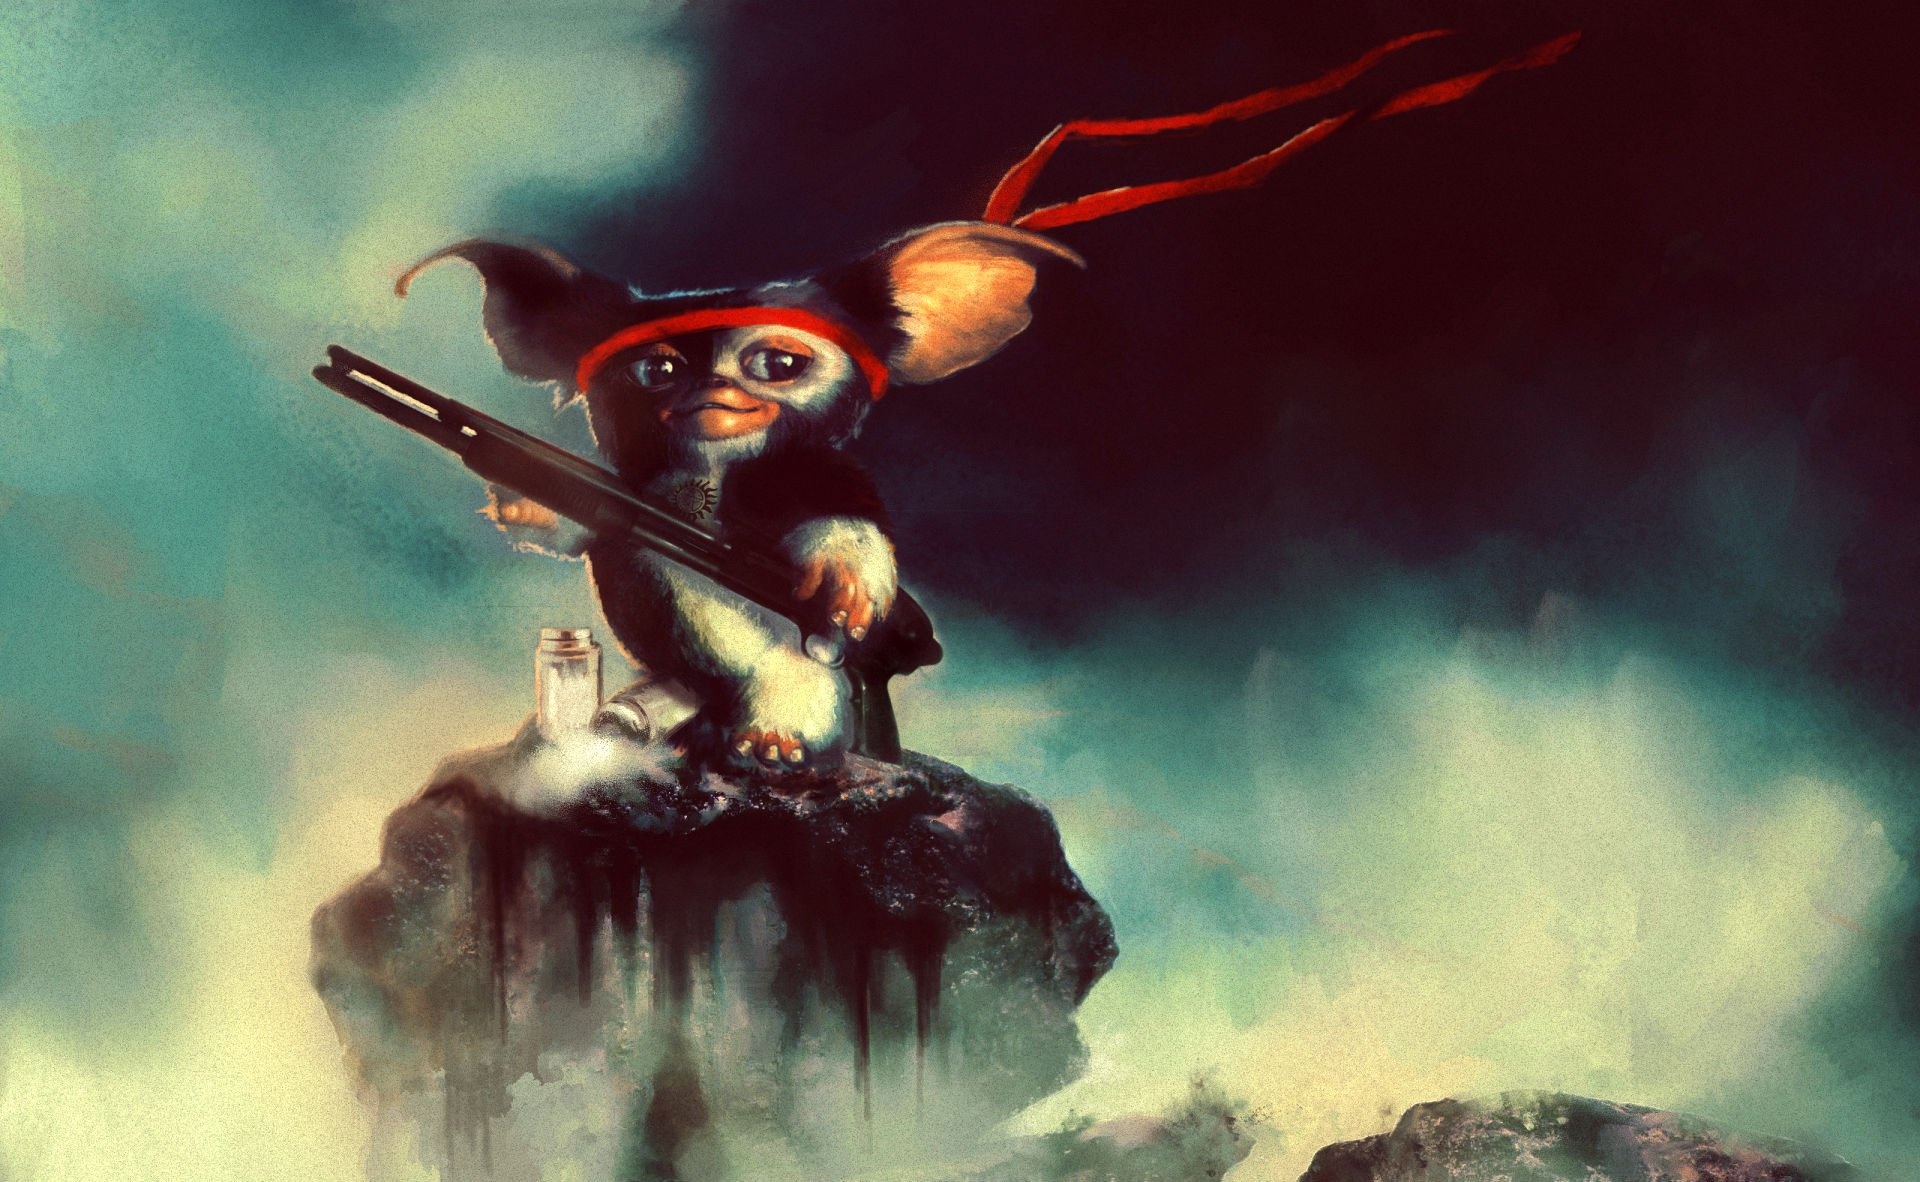 Gremlin Gizmo: Giz with a shotgun, Mogwai that as adept as the monsters are with weapons and electrical devices. 1920x1190 HD Wallpaper.